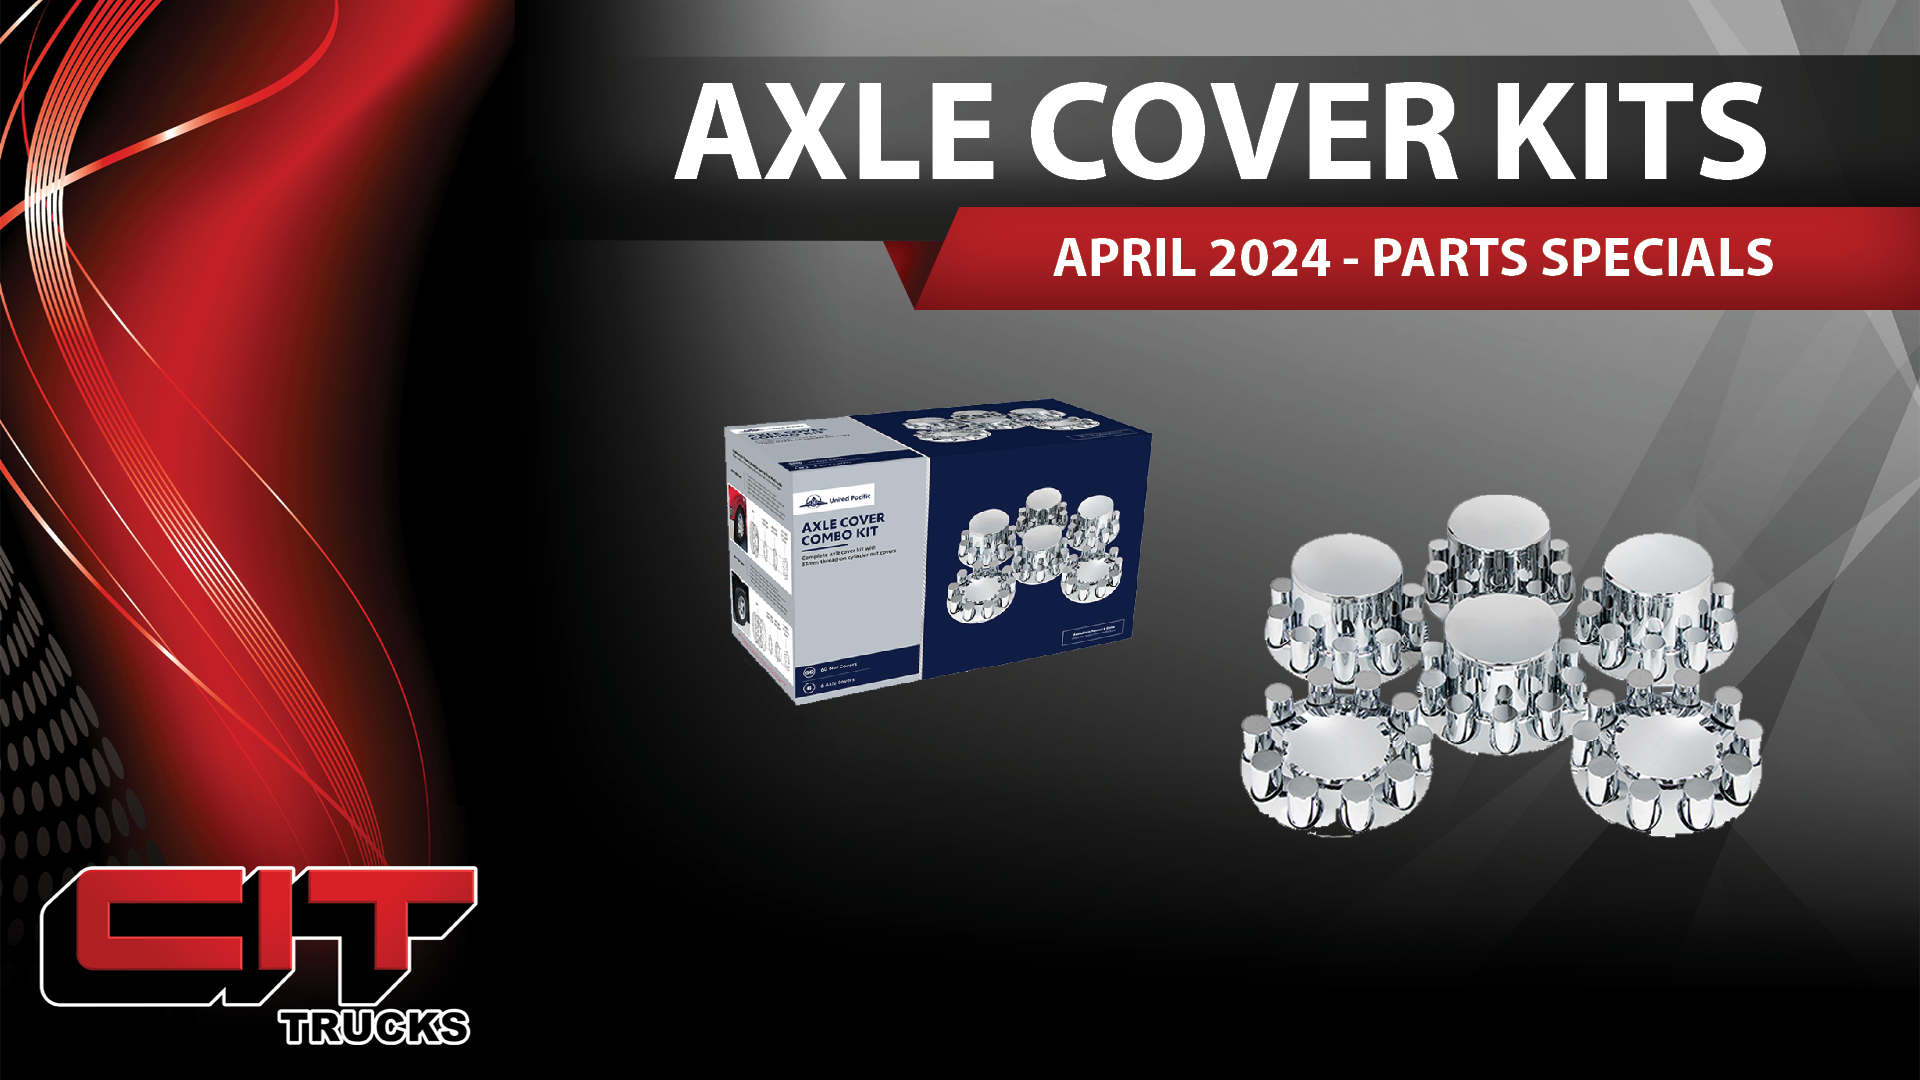 Axle cover kits